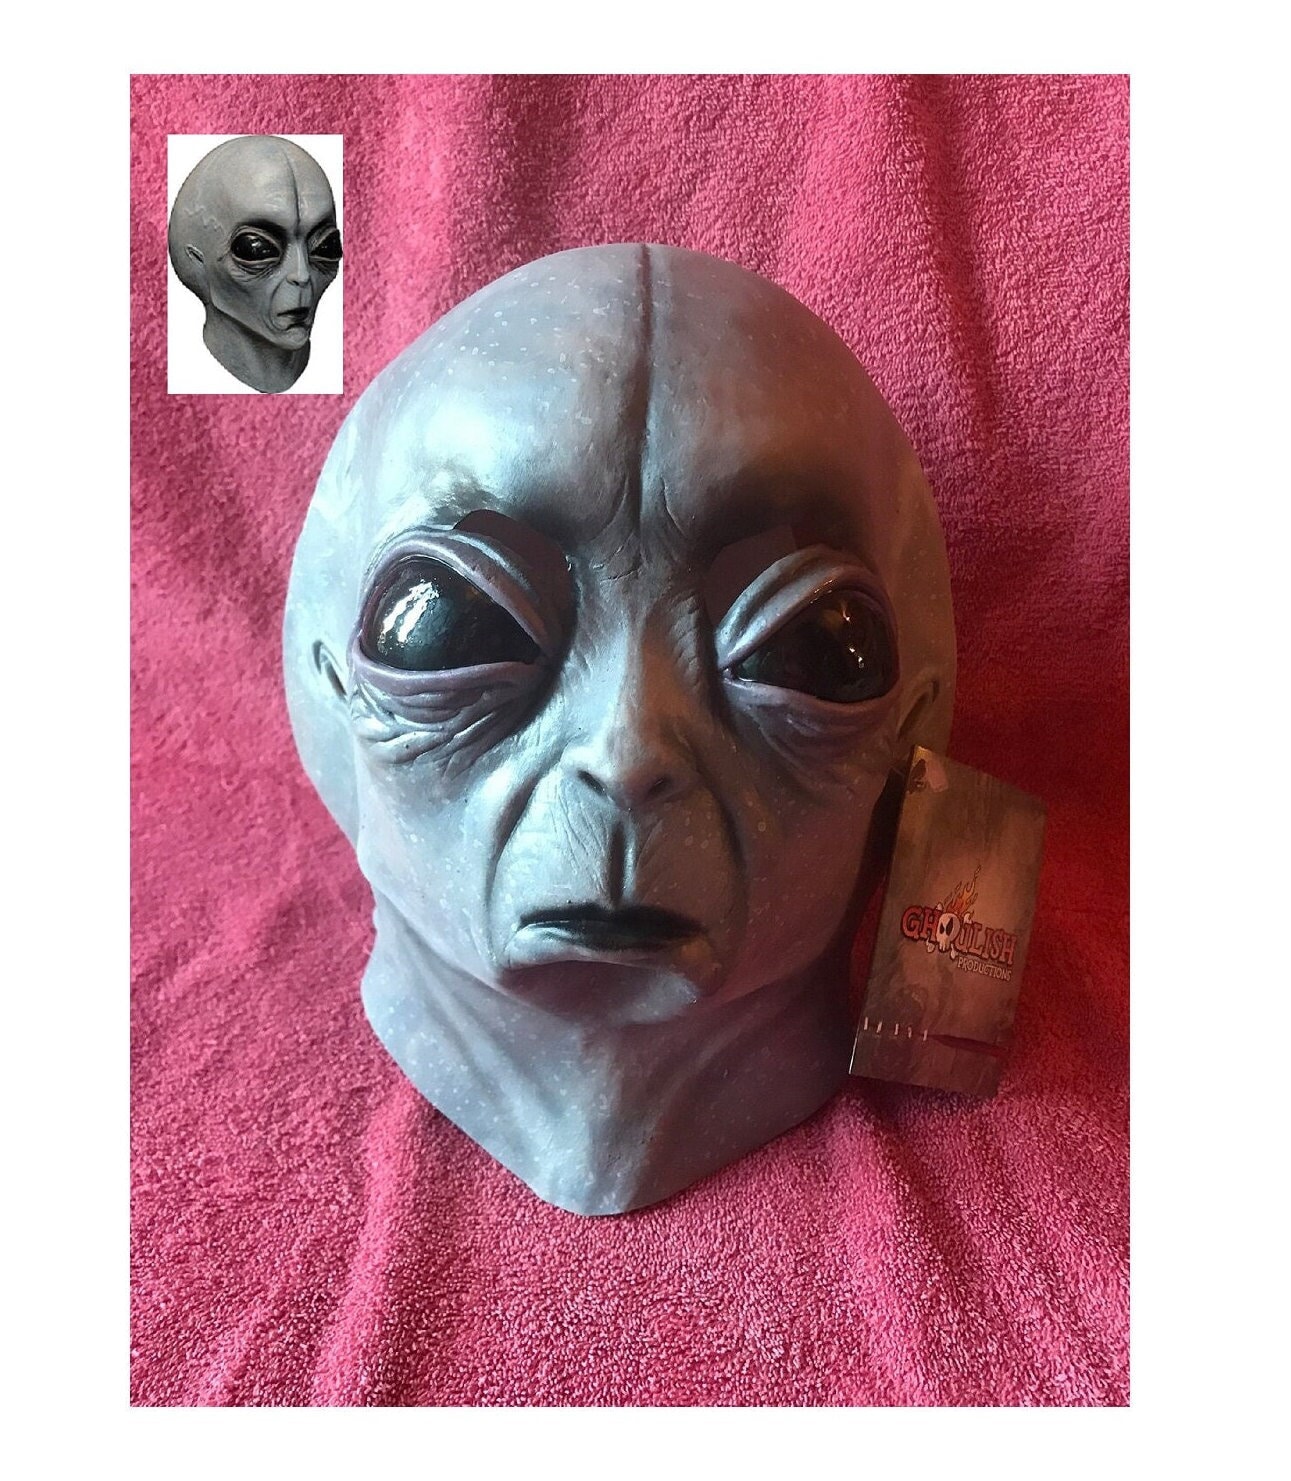 On Sale 30% off New AREA 51 ALIEN Latex Deluxe Mask Free Shipping Item is A  Item Can Be Repainted, Redesigned or Rehauled. 